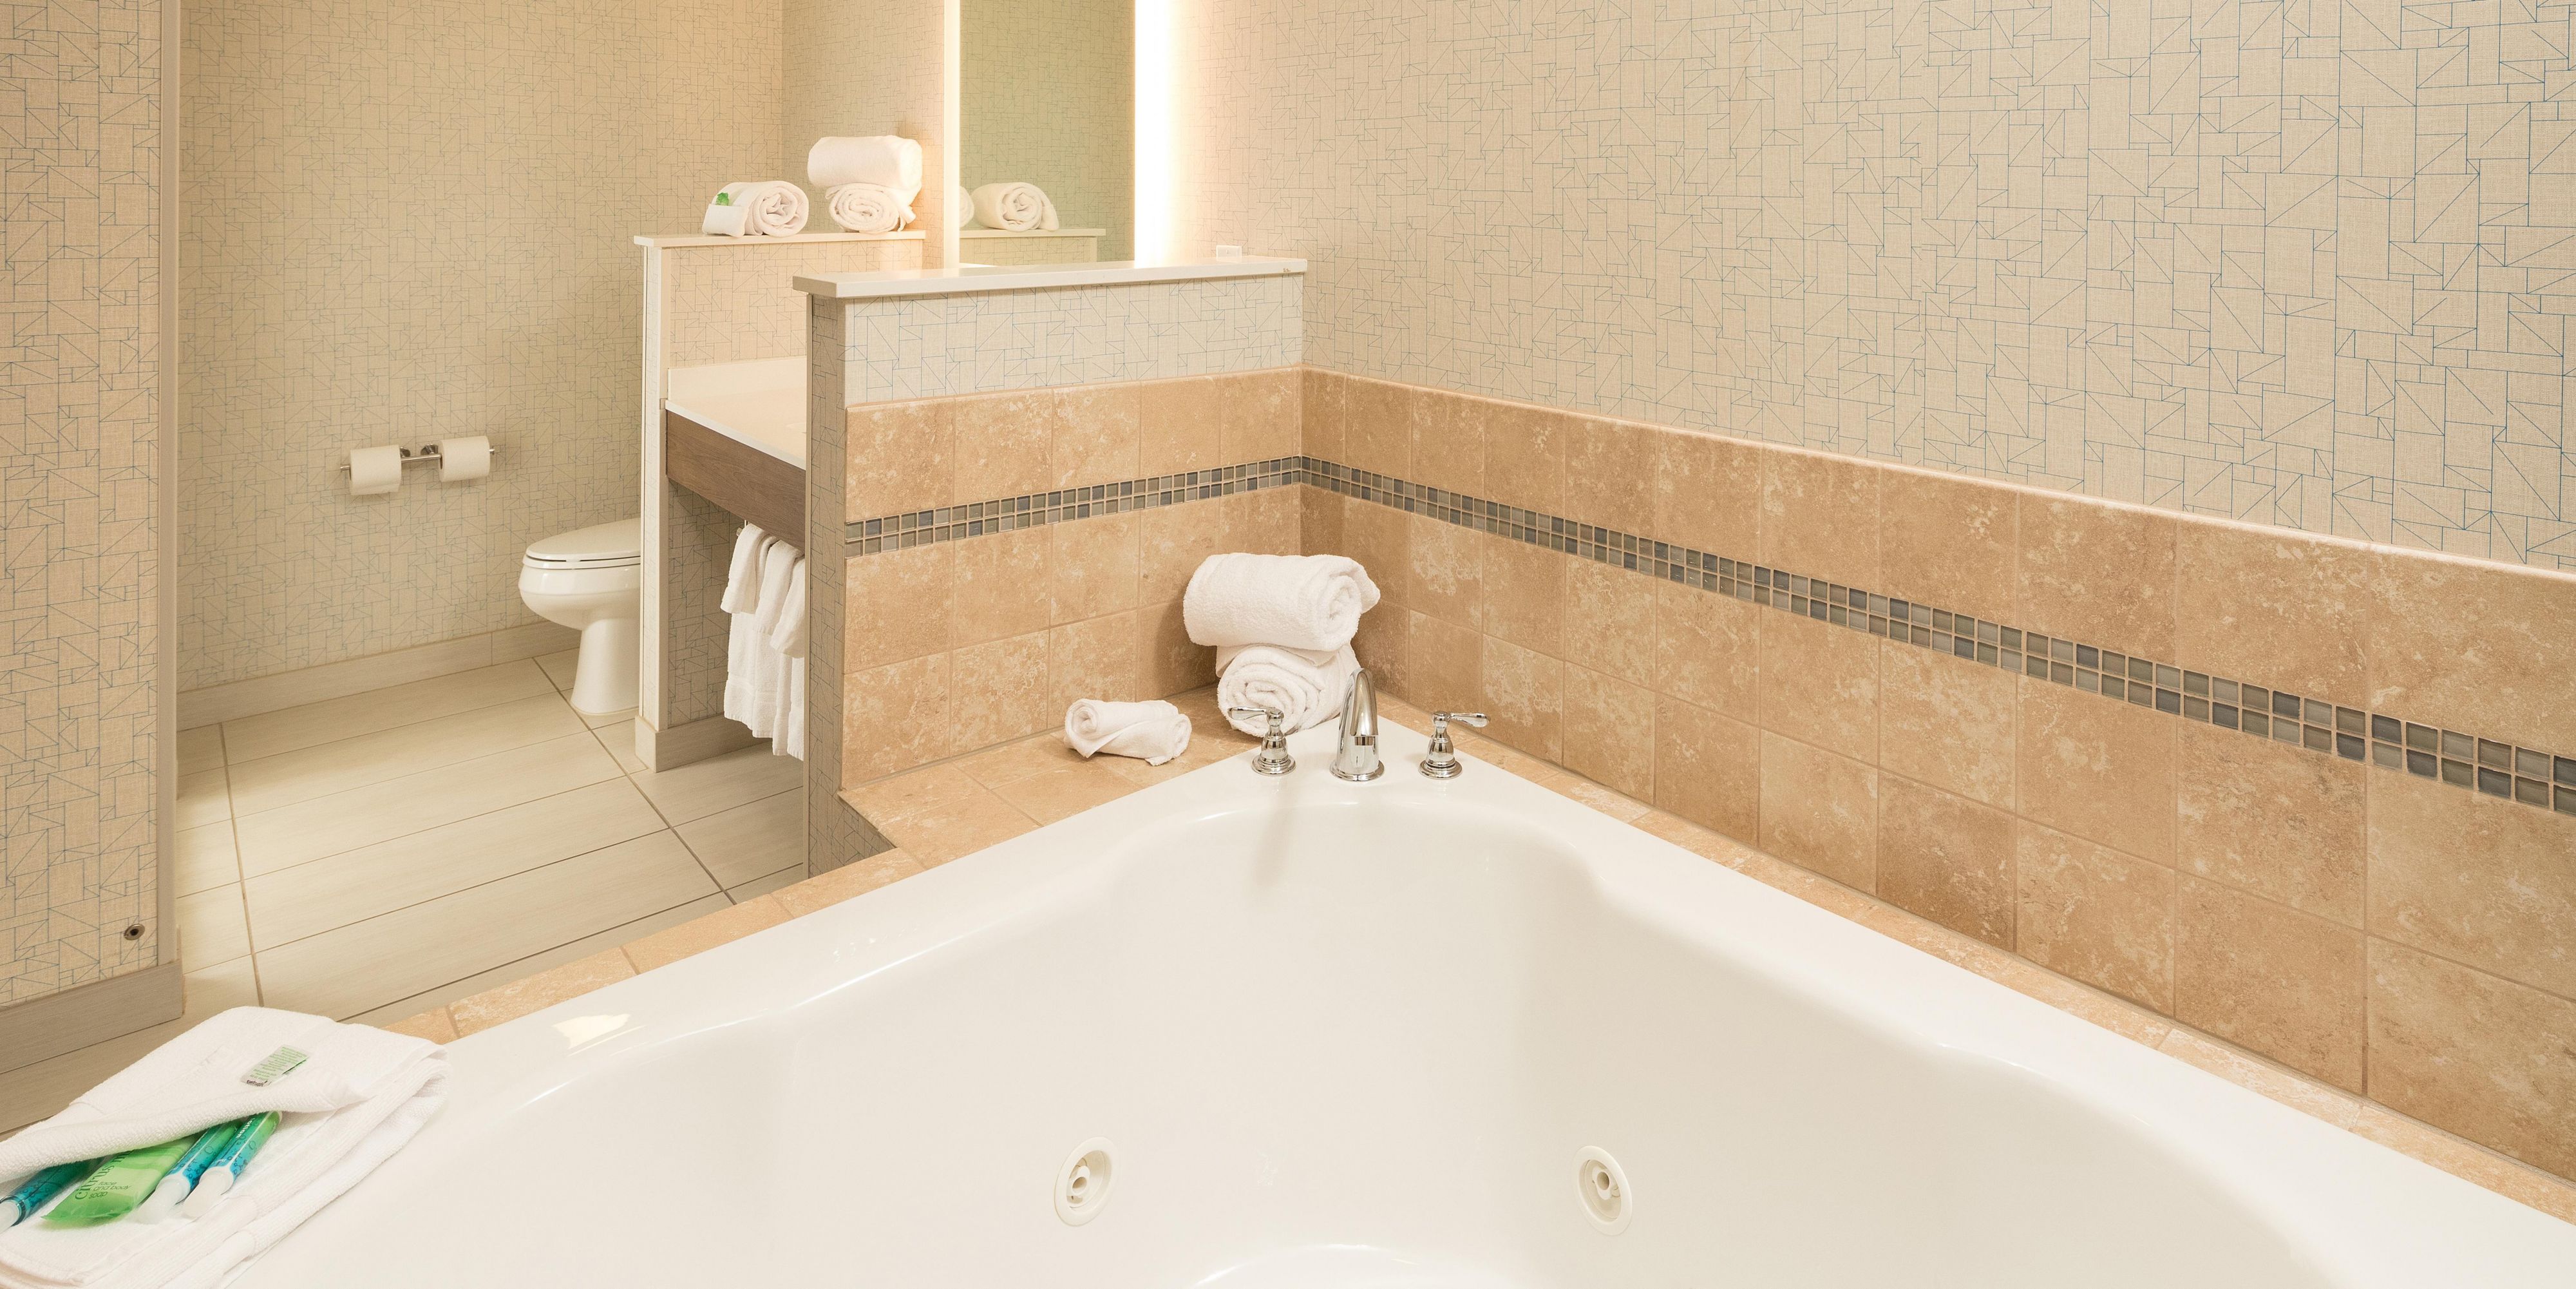 Enjoy a weekend away in one of our Jacuzzi Suites. Call 219-734-6000 for pricing and availability. 